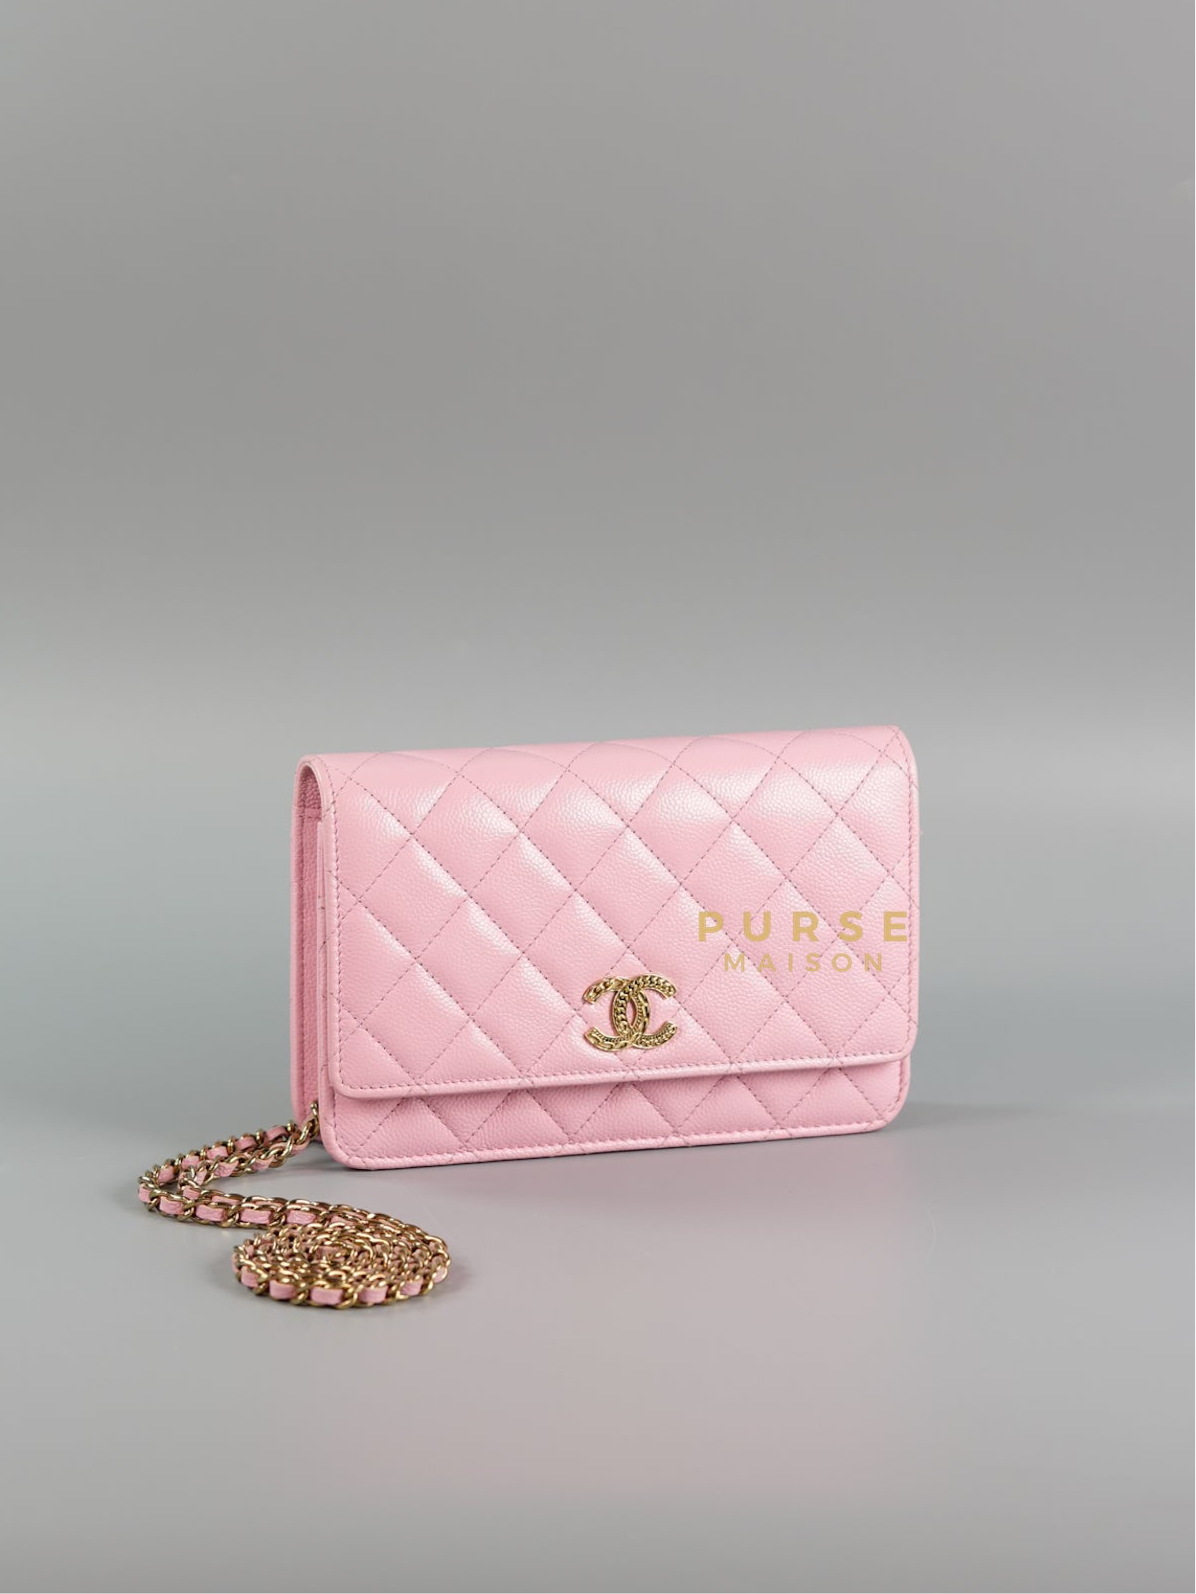 22k Wallet on Chain in Pink Caviar Leather and Gold Hardware (Microchip) | Purse Maison Luxury Bags Shop